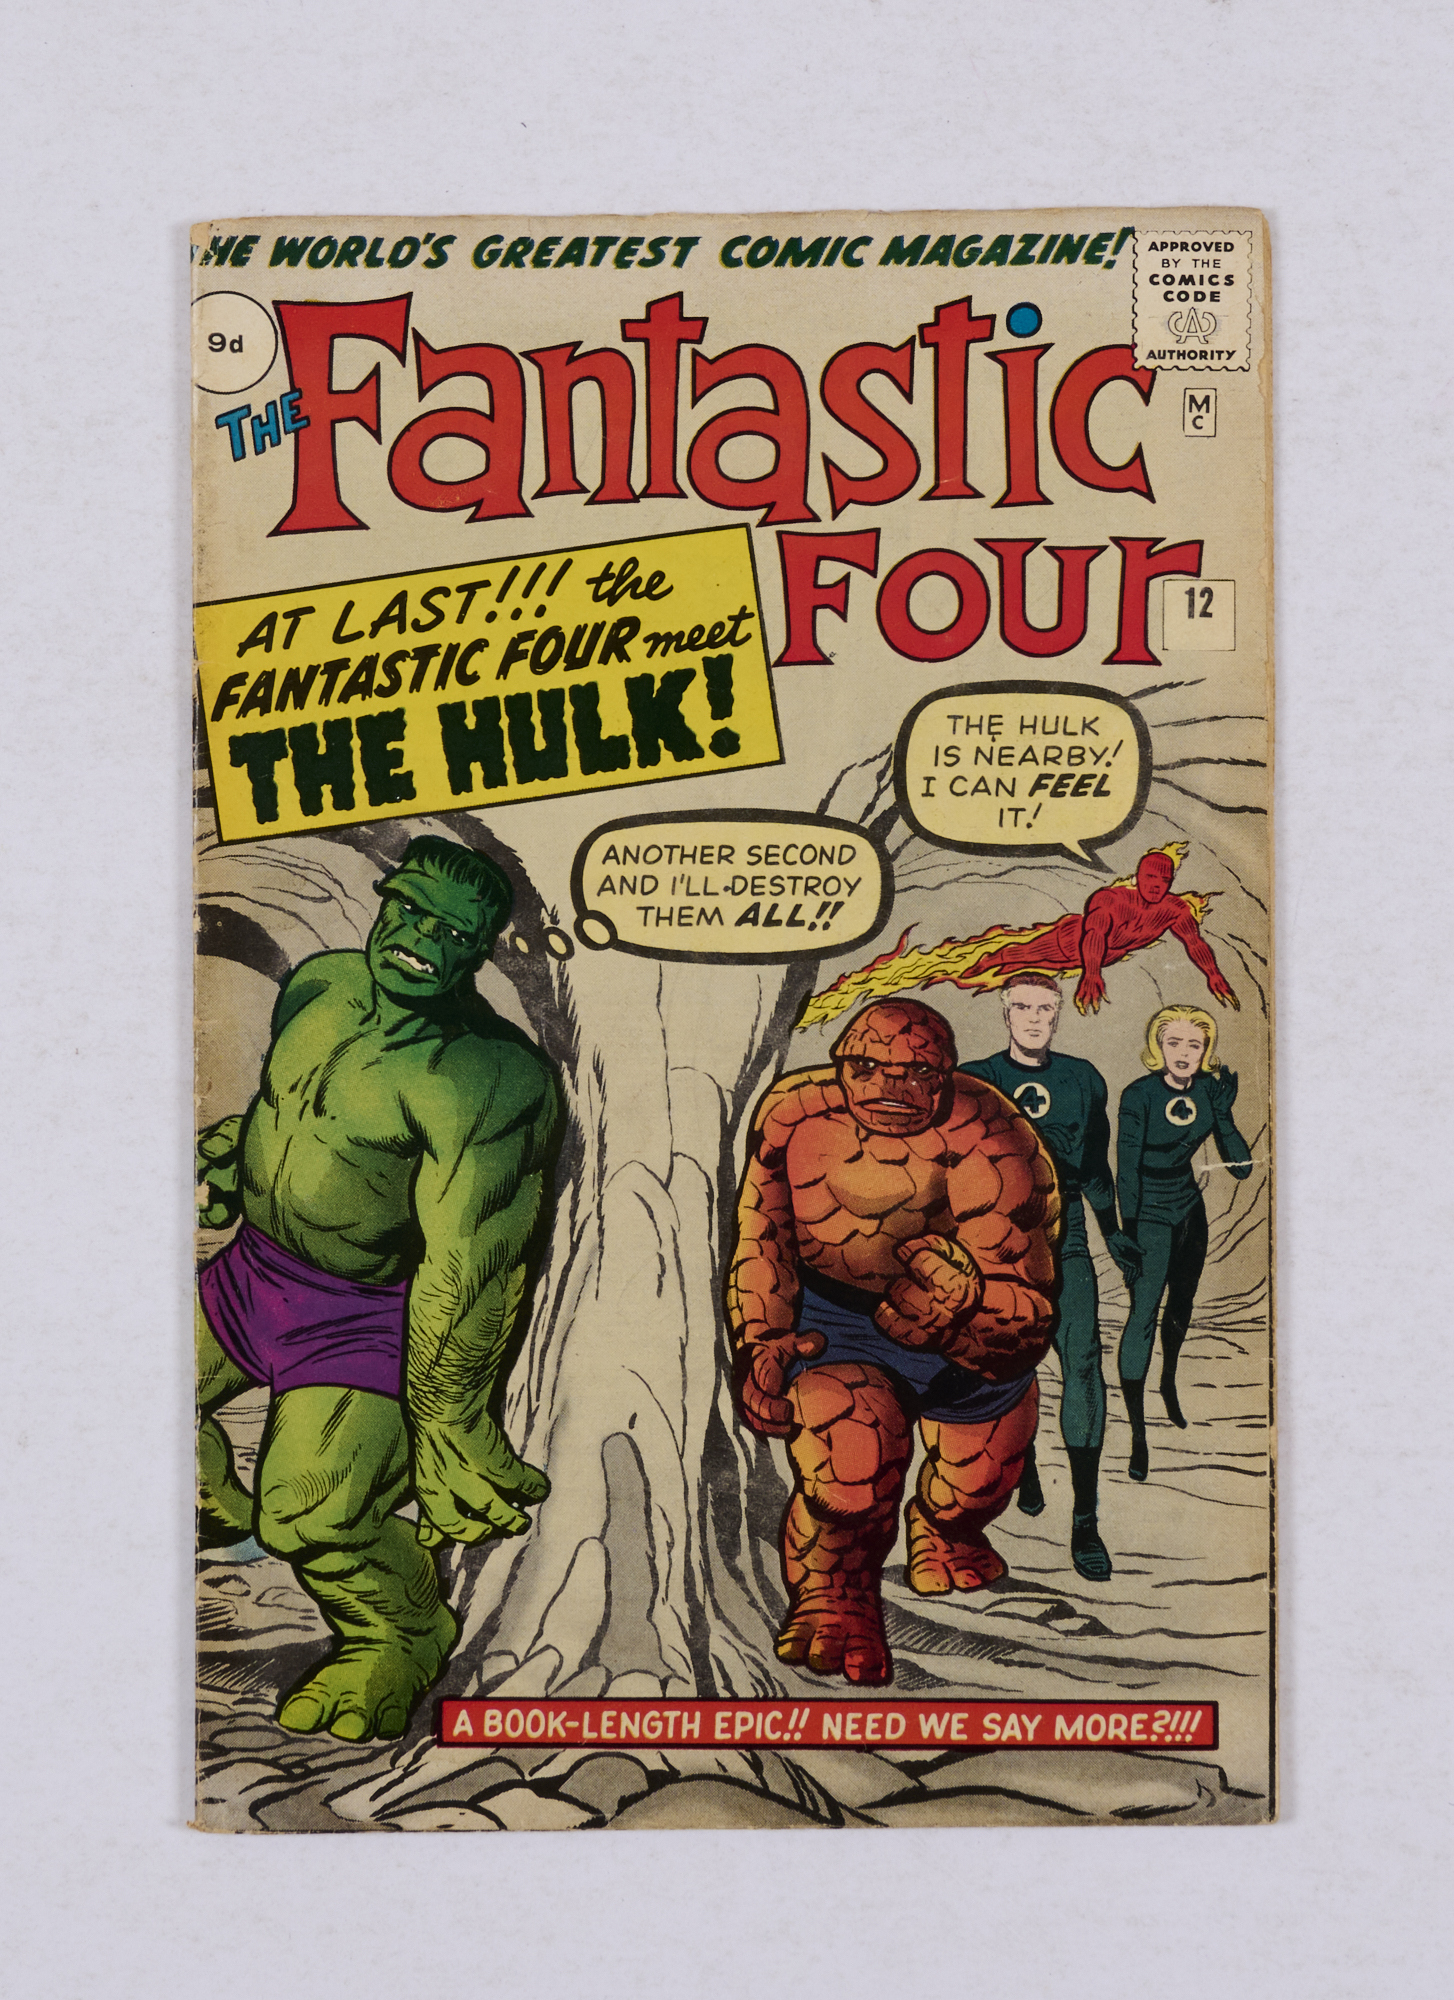 Fantastic Four 12 (1963) ½ ins RH cover tear with some minimal chipping. Cream pages [vg-]. No